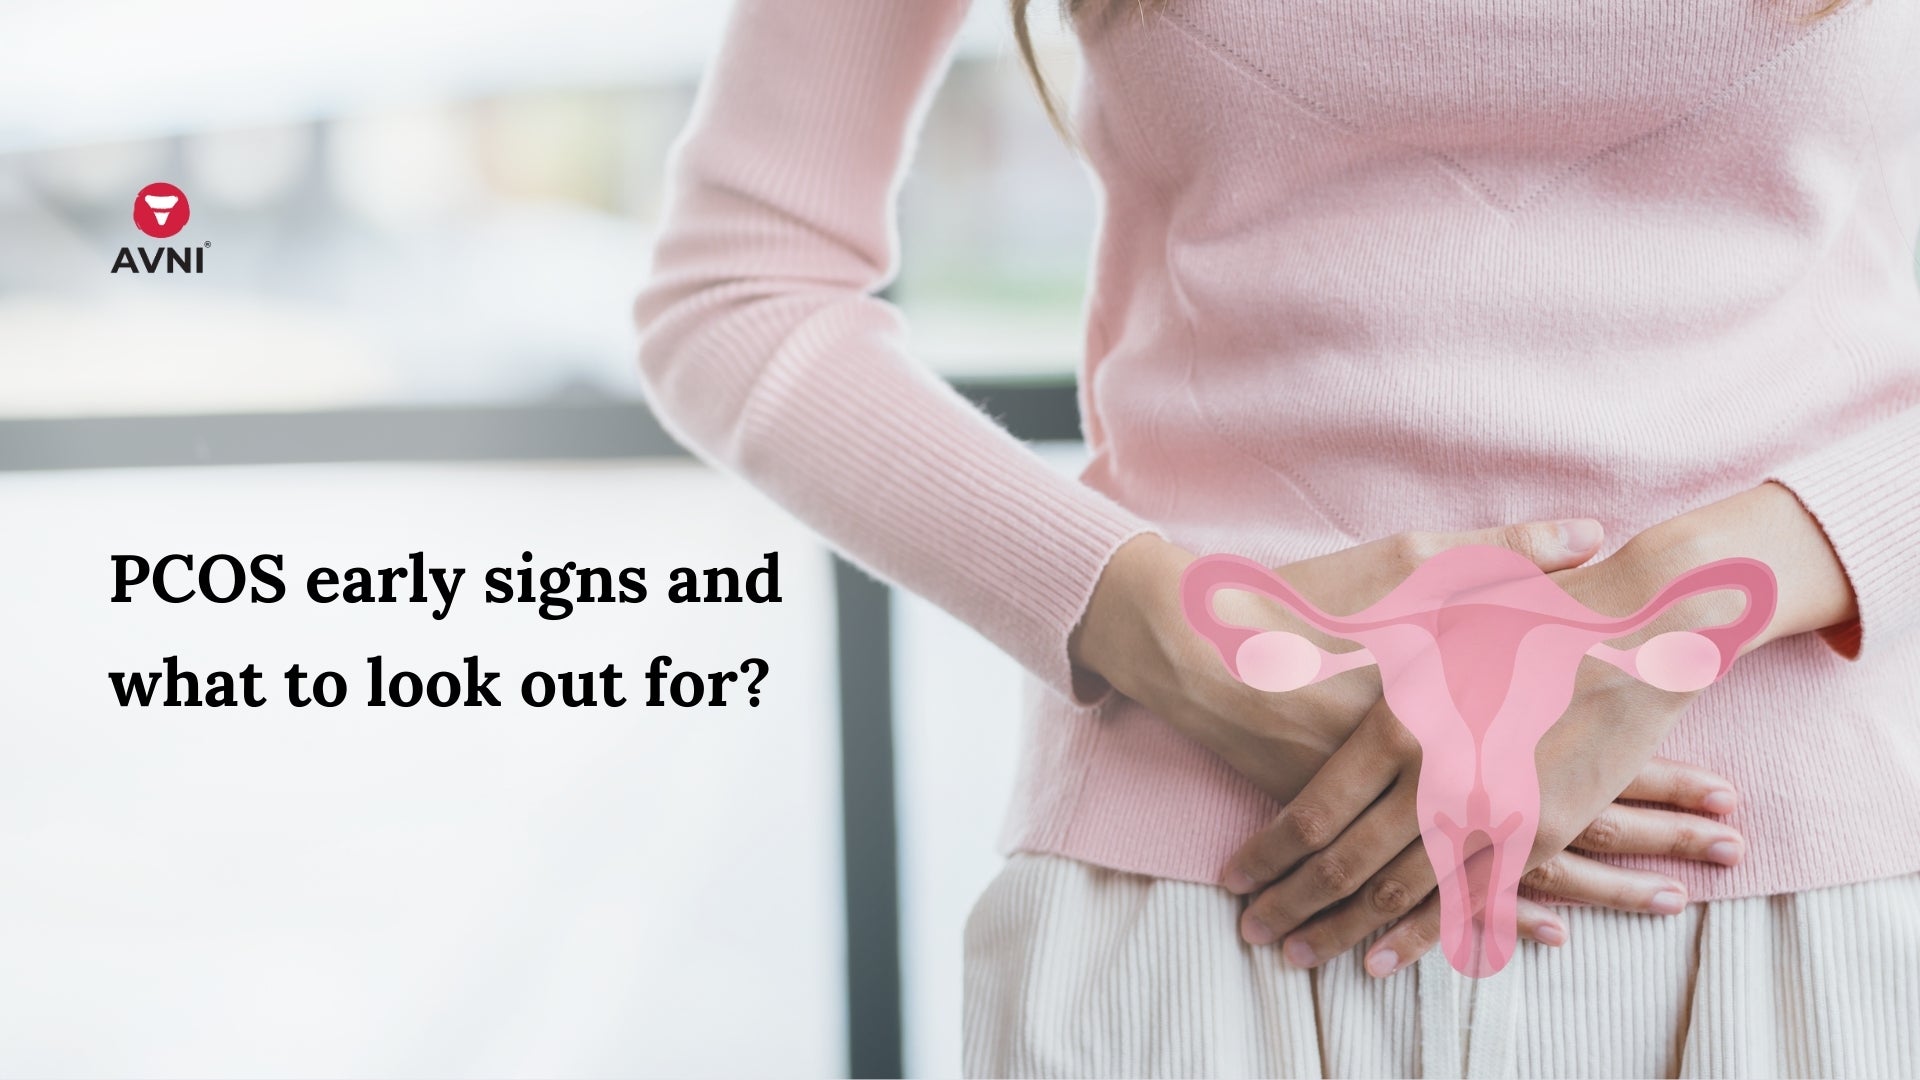 PCOS early signs and what to look out for?